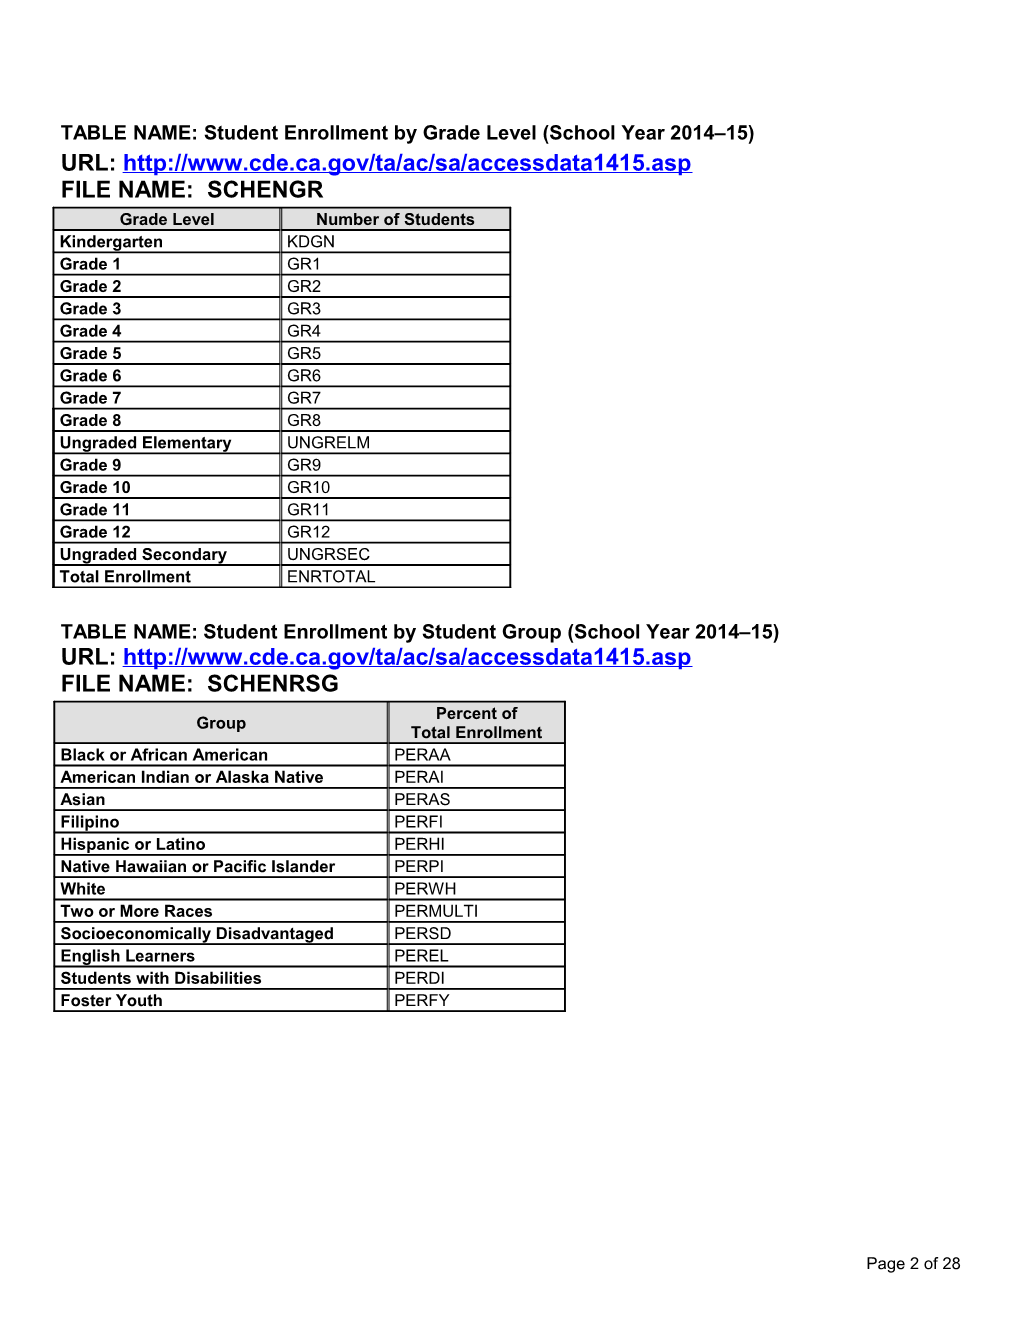 2014-15 SARC Data Layout - School Accountability Report Card (CA Dept of Education)